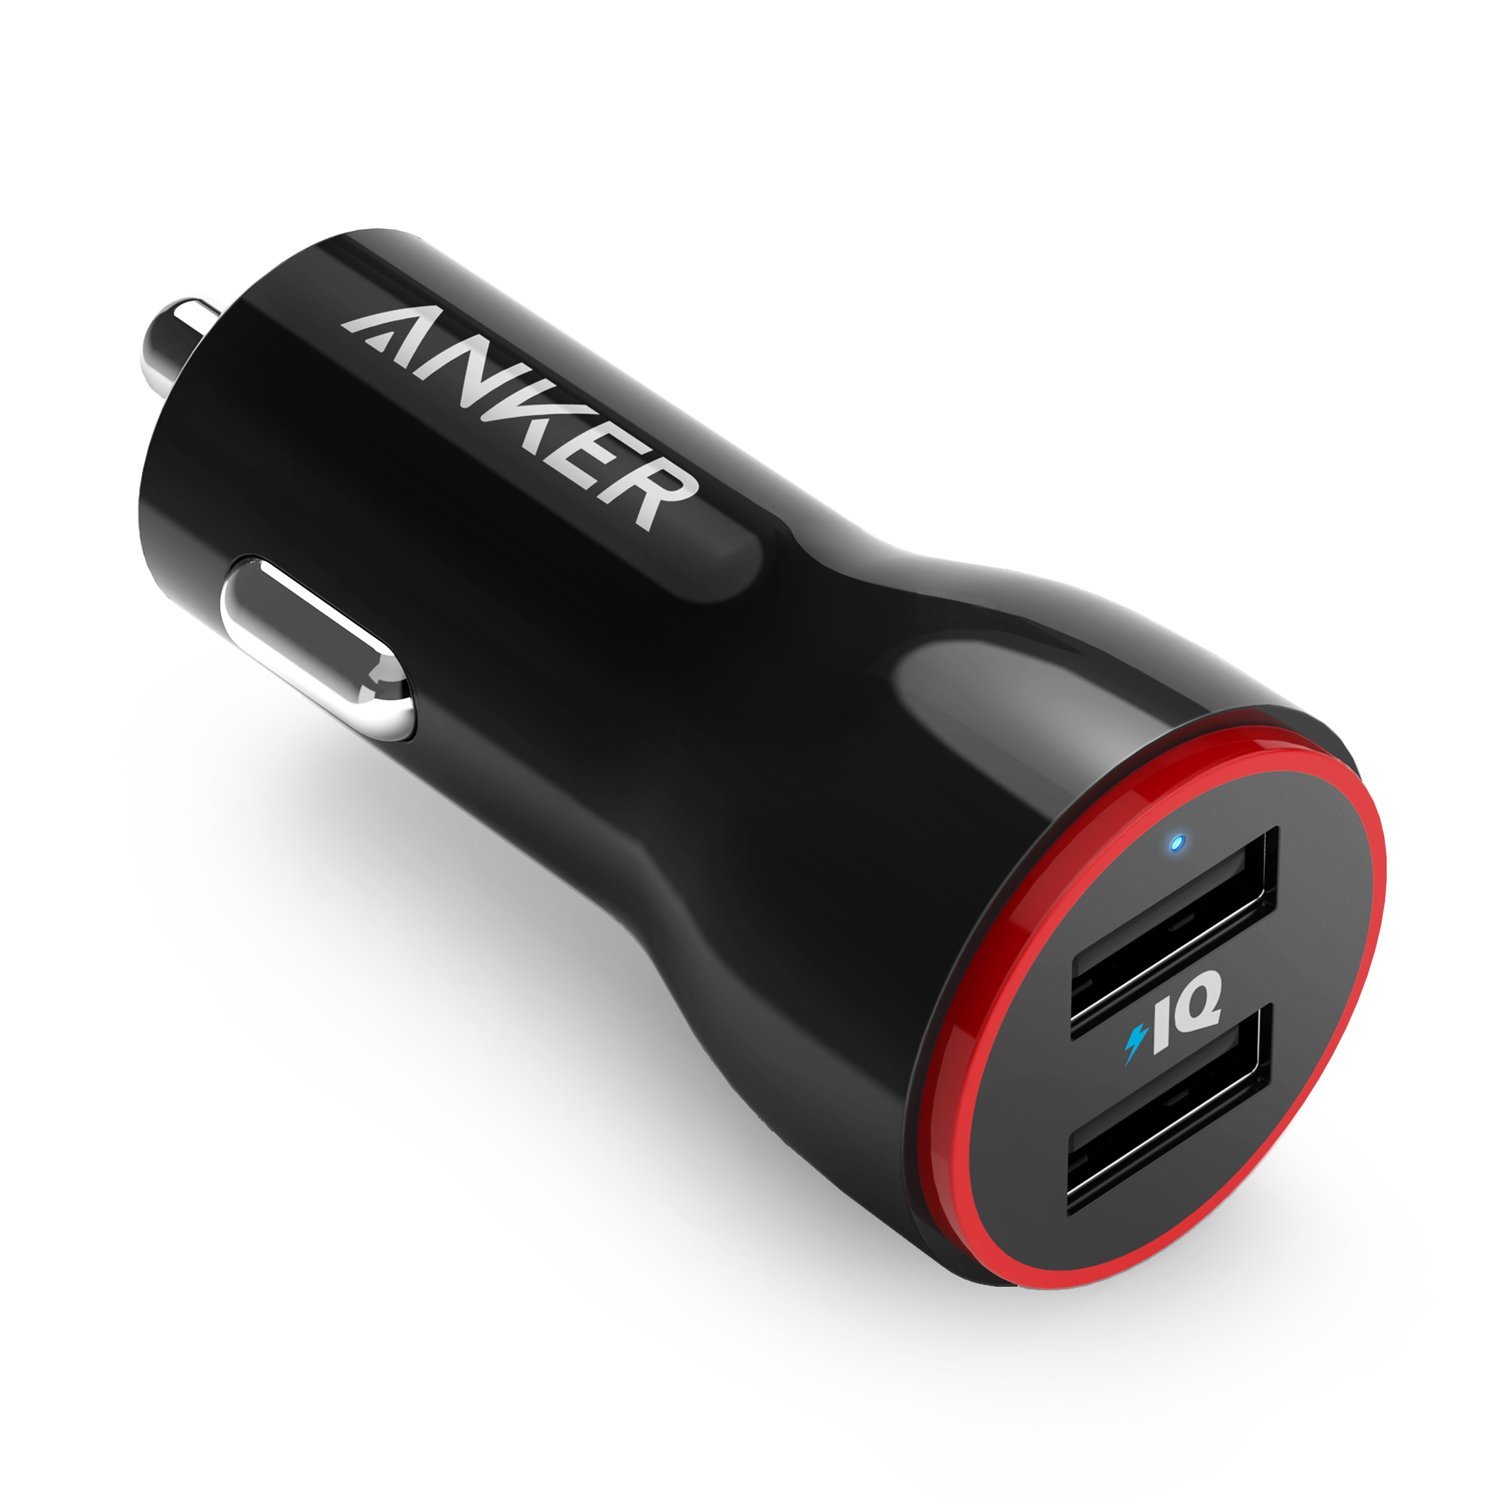 Anker 24W dual port USB car charger for $10